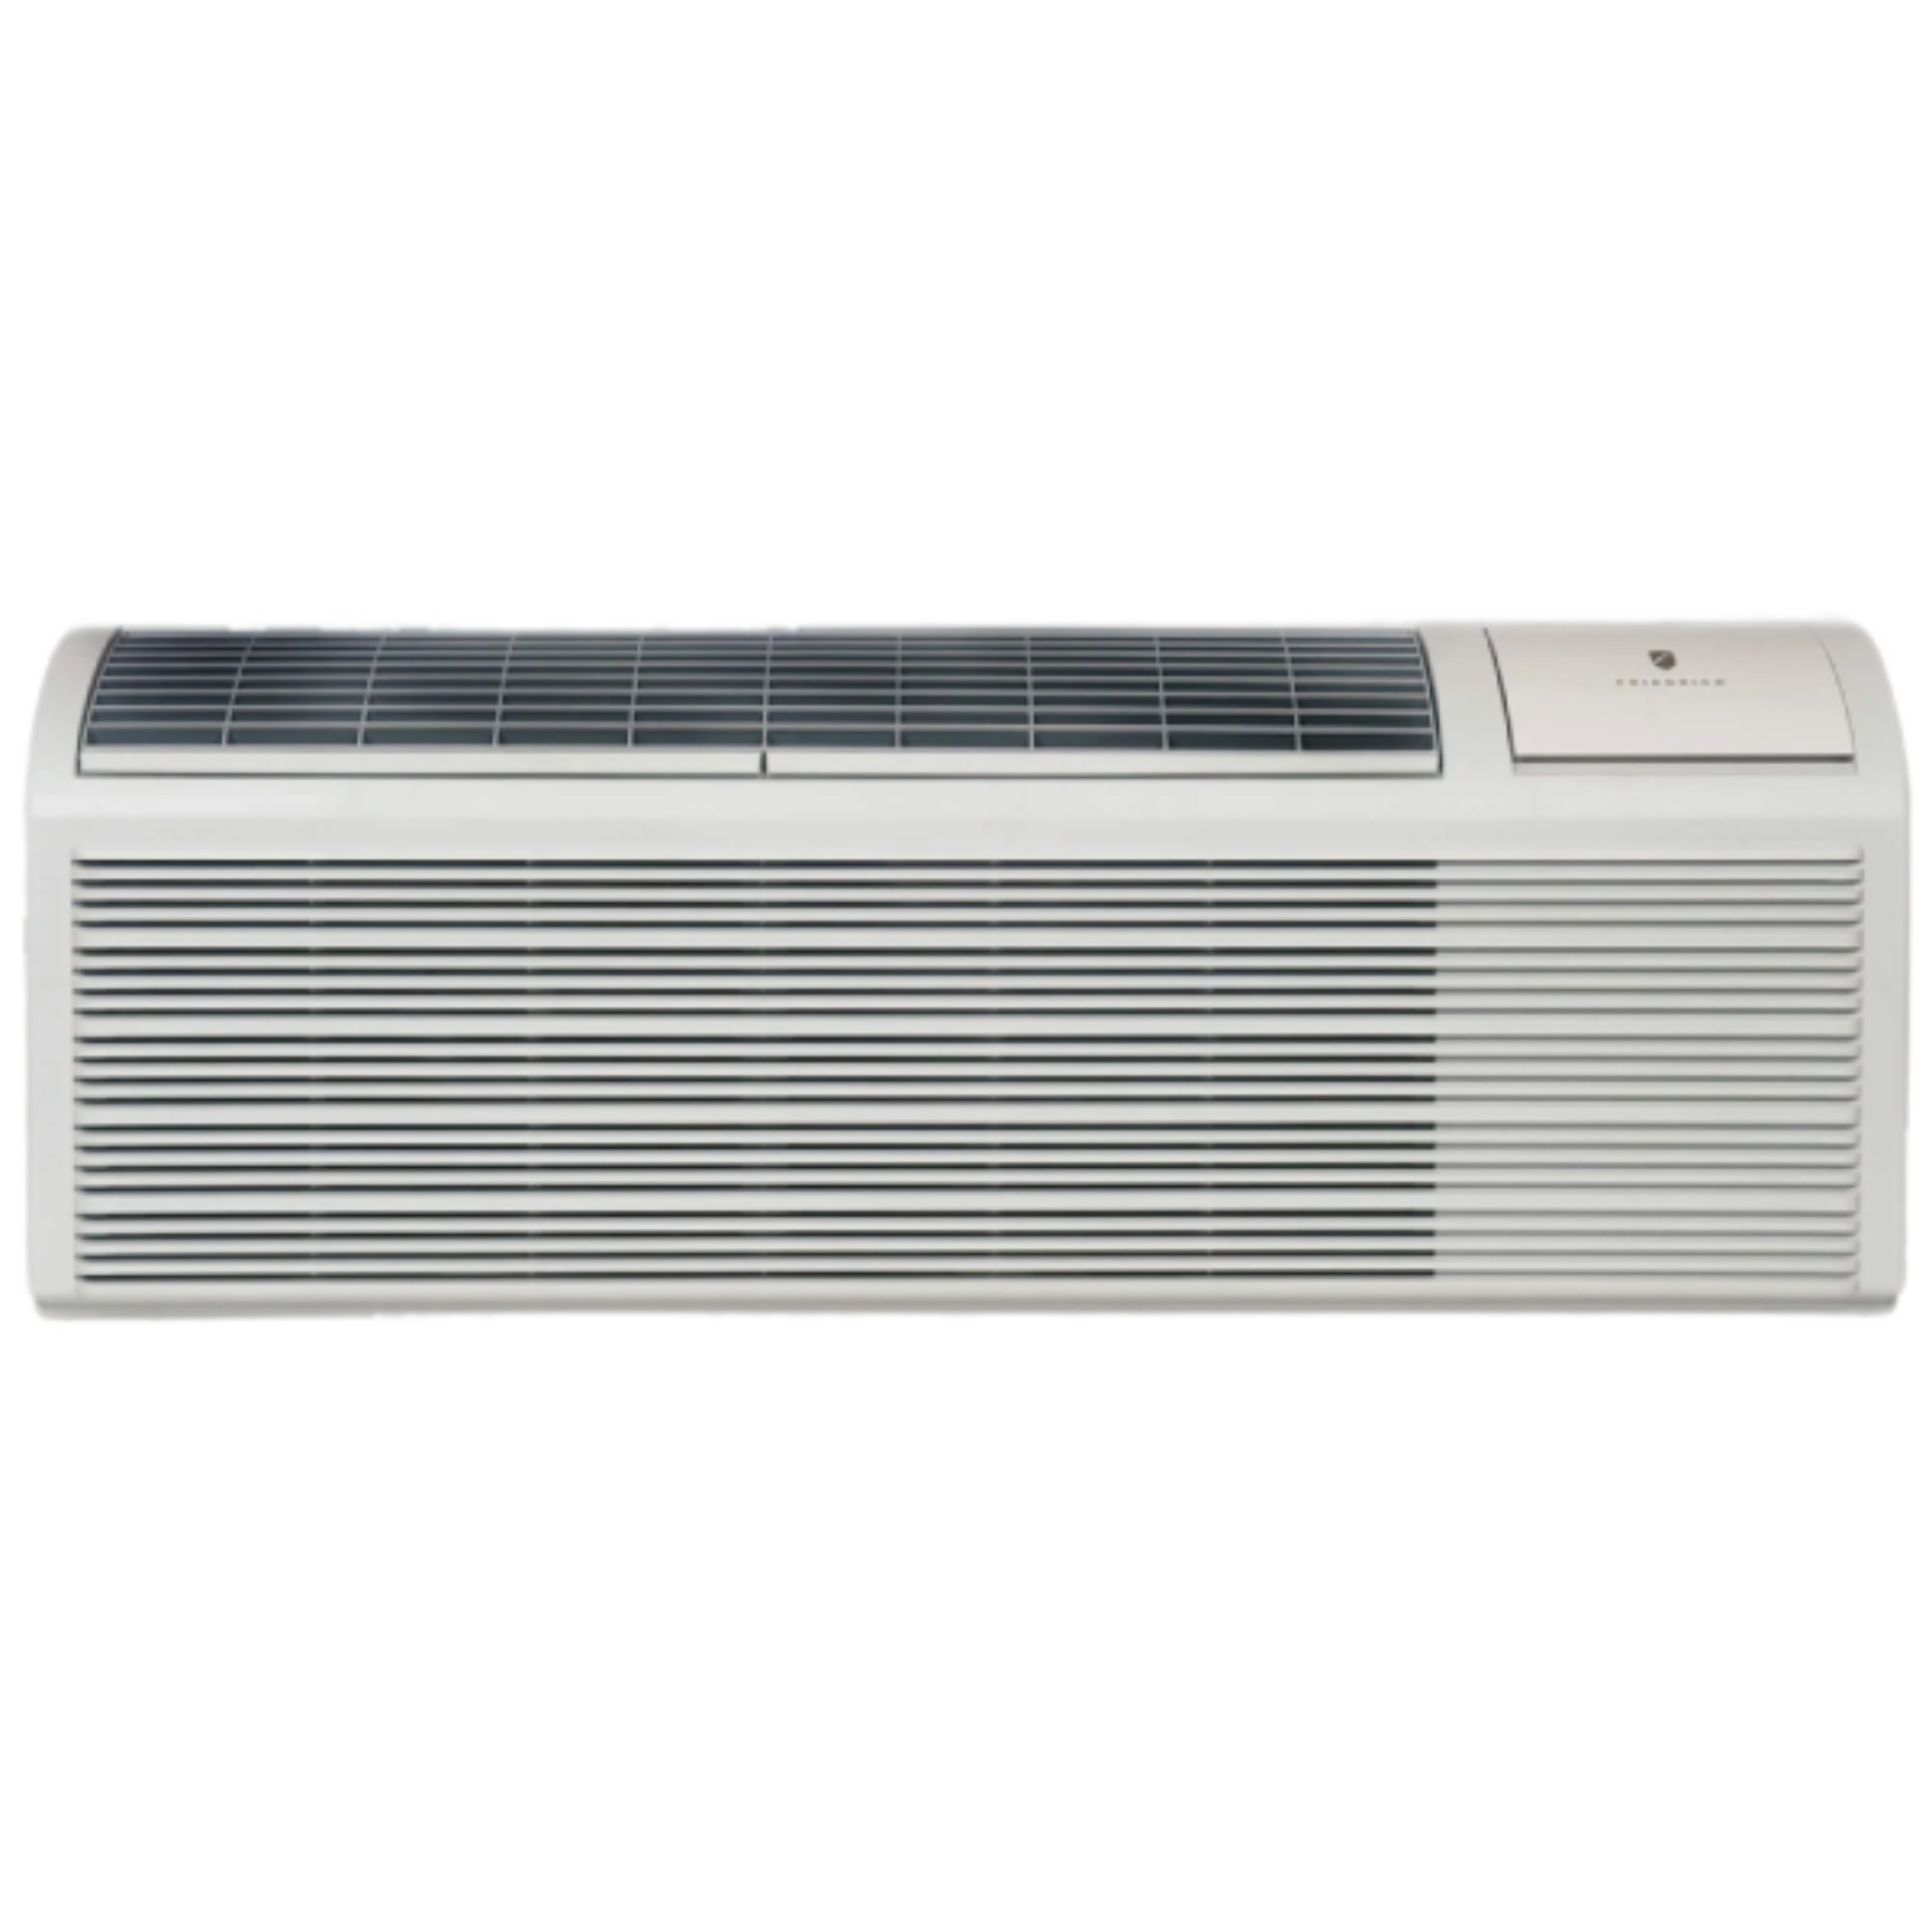 Friedrich ZoneAire Premier Packaged Terminal Air Conditioner with Electric Heat Model PDE15R3SG, 10.4 EER, 265 V, 400 CFM, 14500 BTU